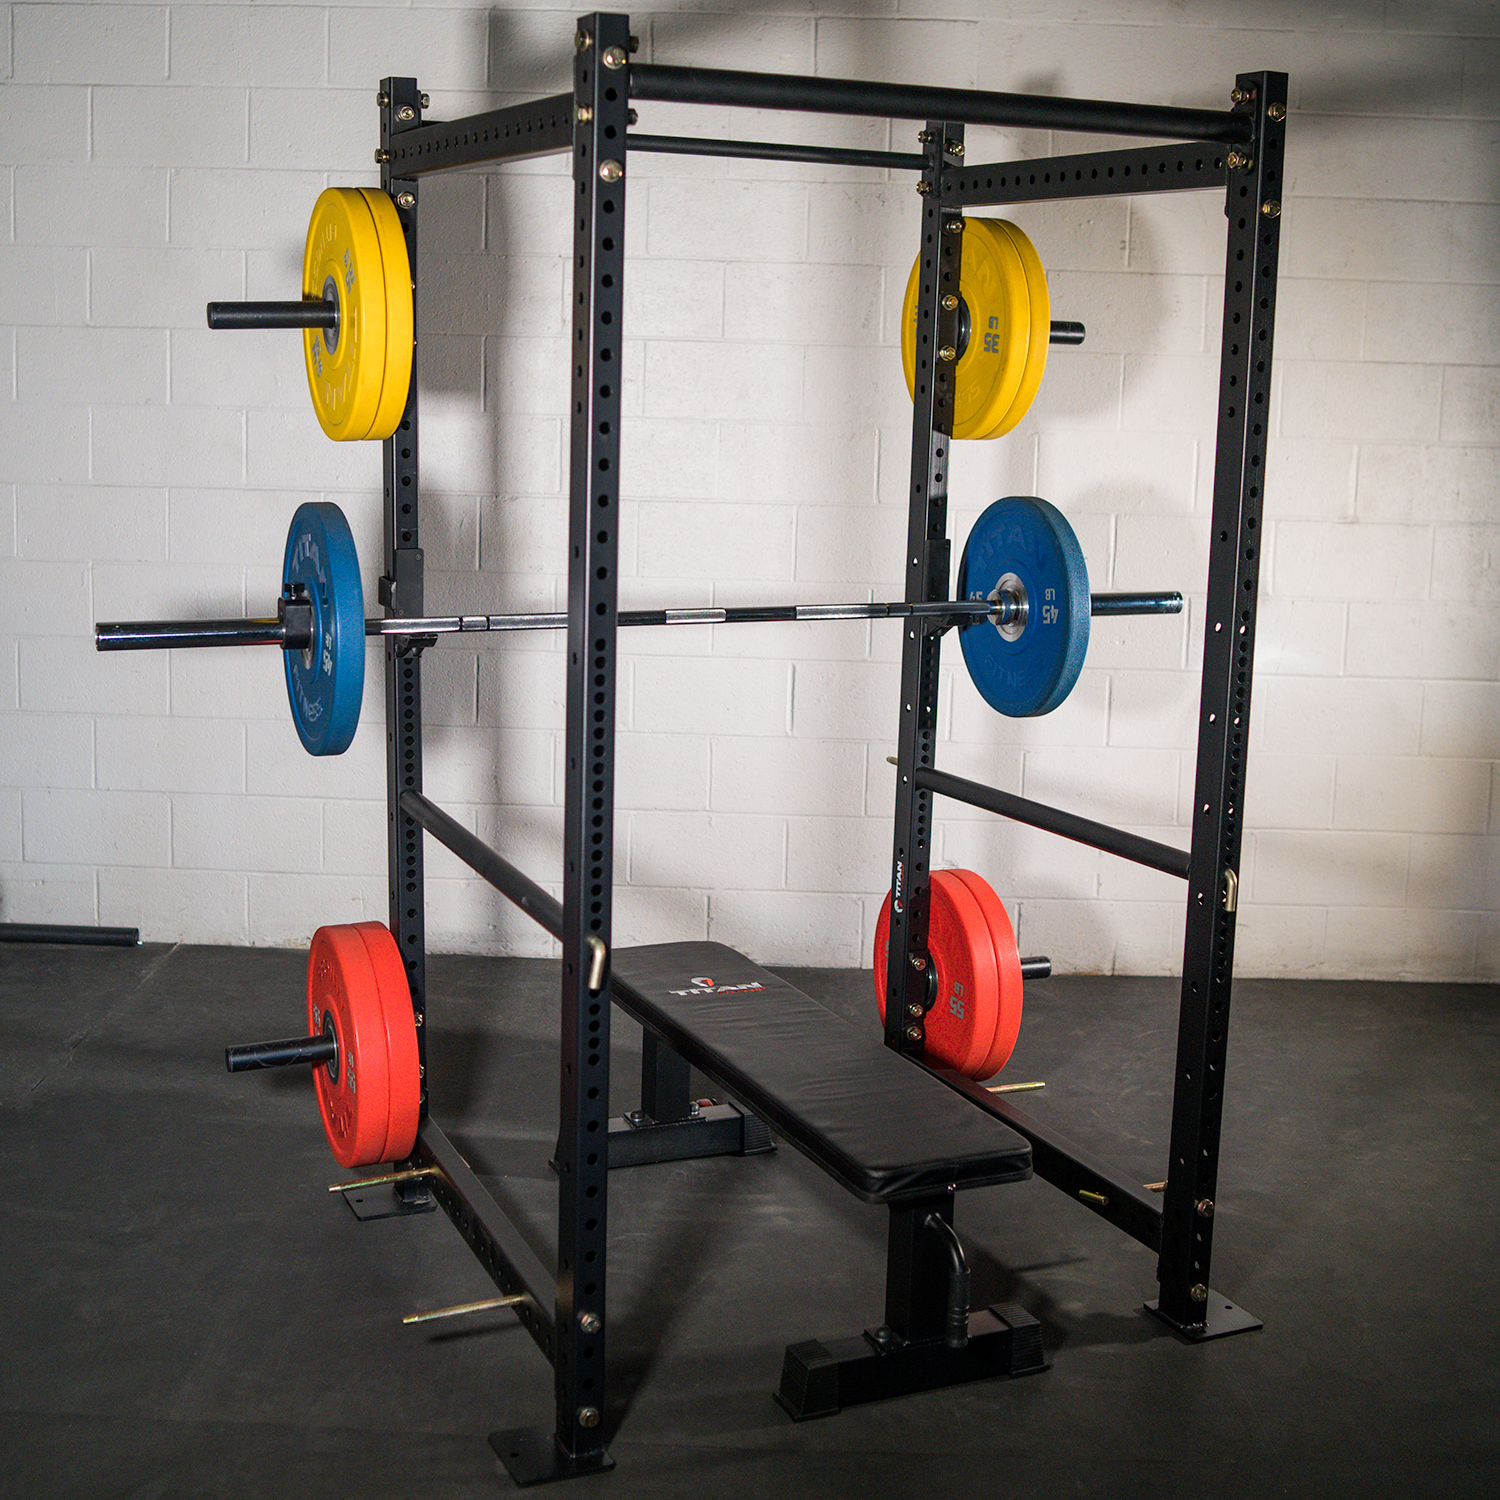 Titan Fitness T-3 Tall Power Rack 36" Depth with Safety Bars and J Hooks - image 5 of 6